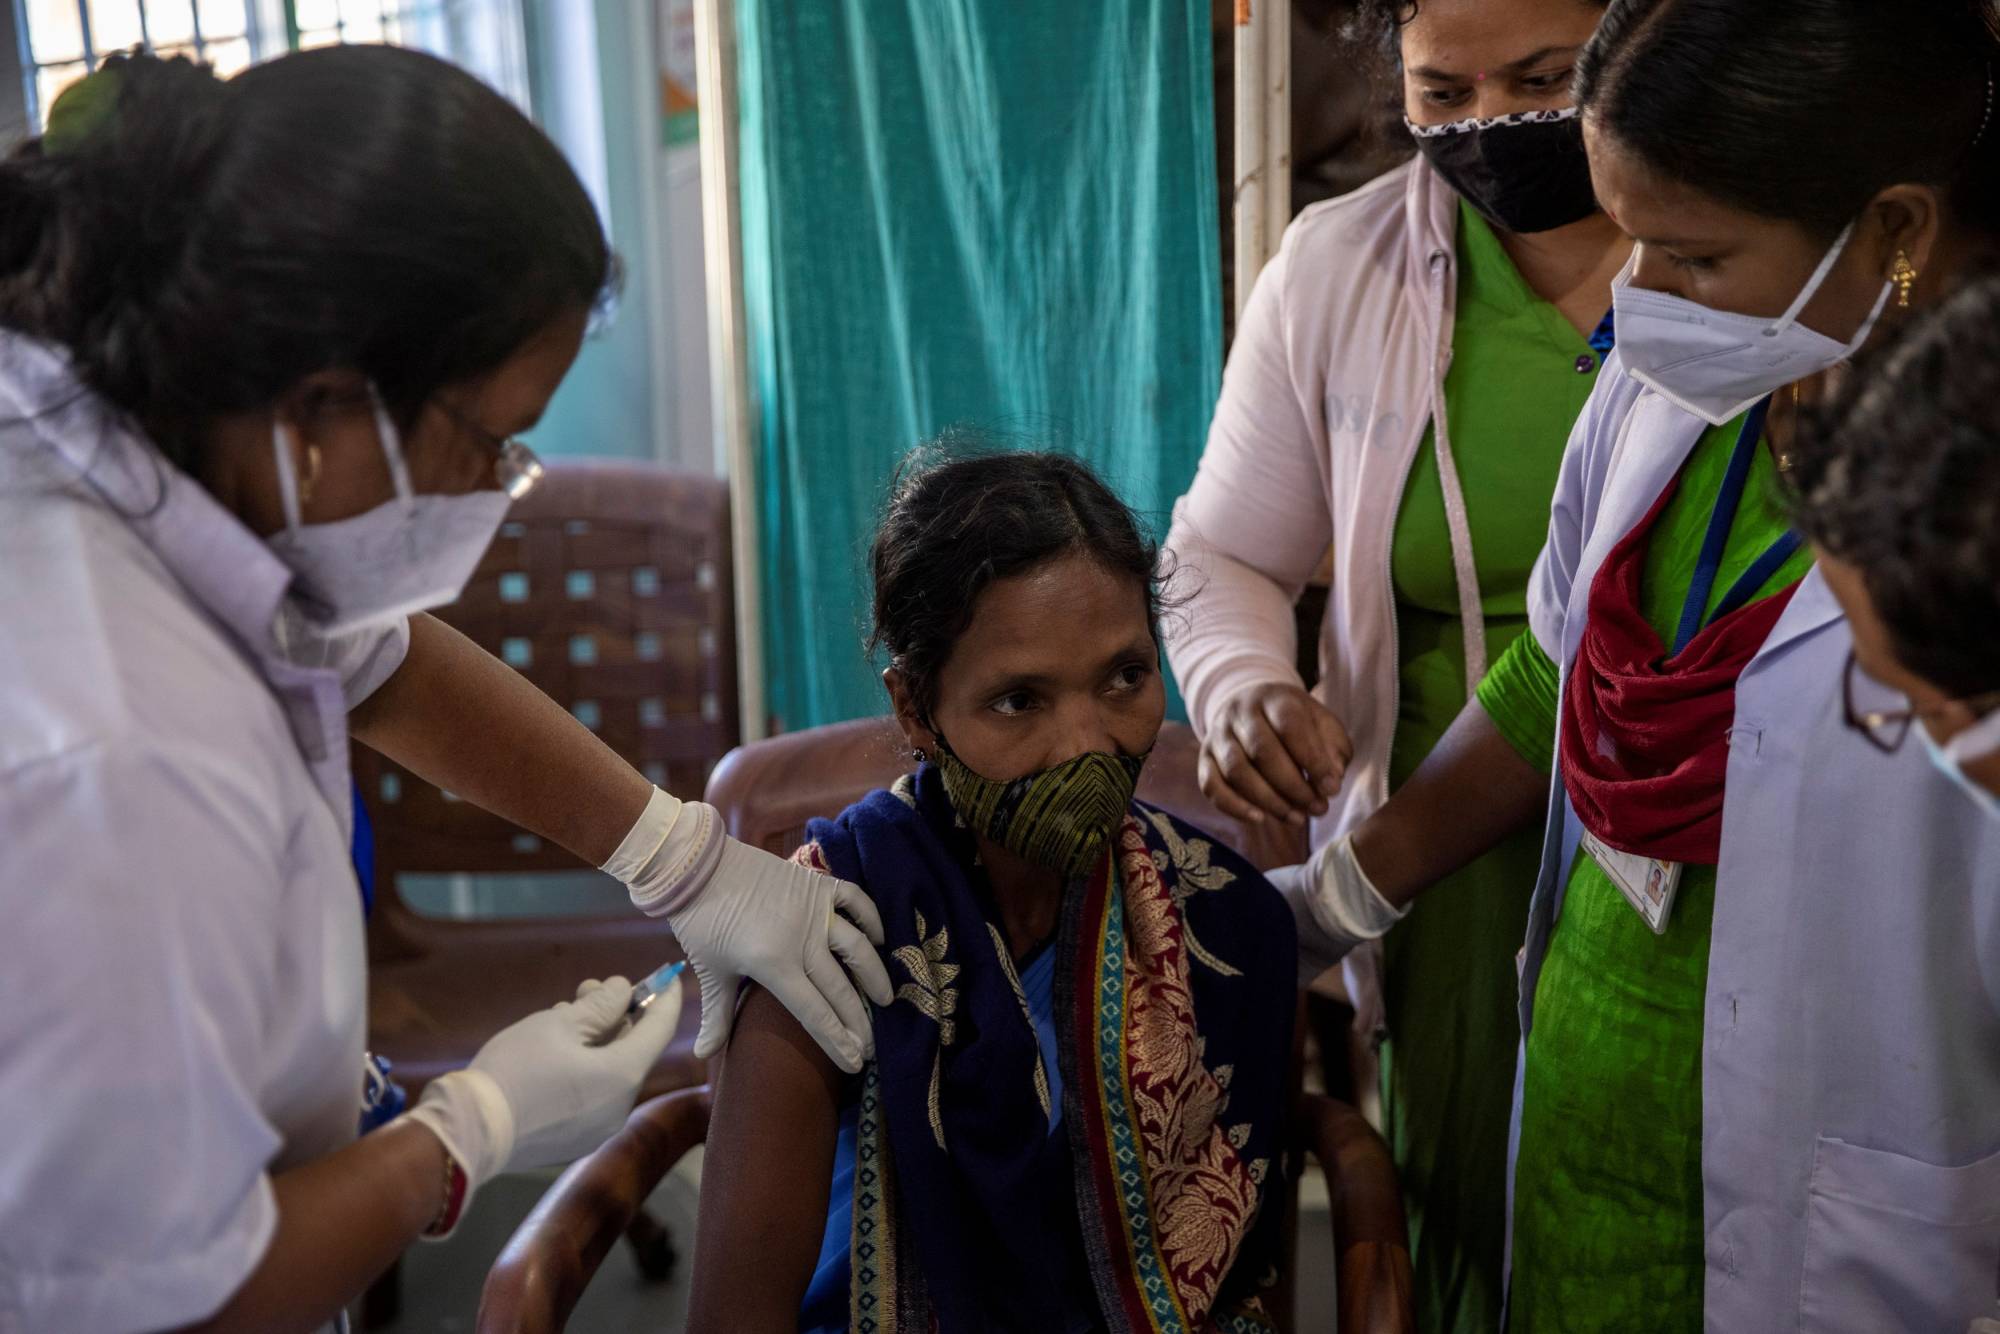 Indian Slum Residents Deceived into Taking Trial COVID-19 Vaccine